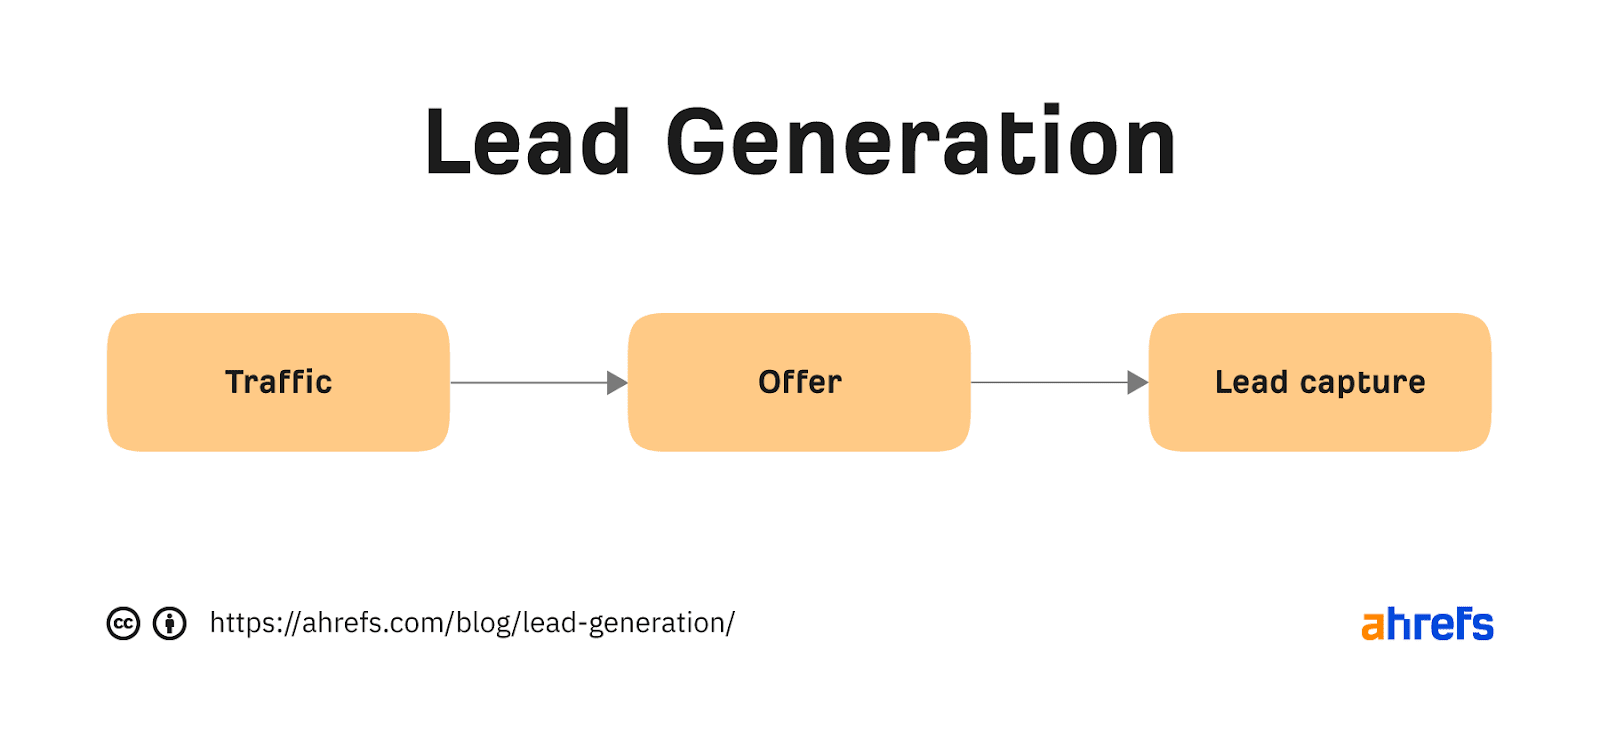 Infographic of lead generation process: traffic, offer, lead capture